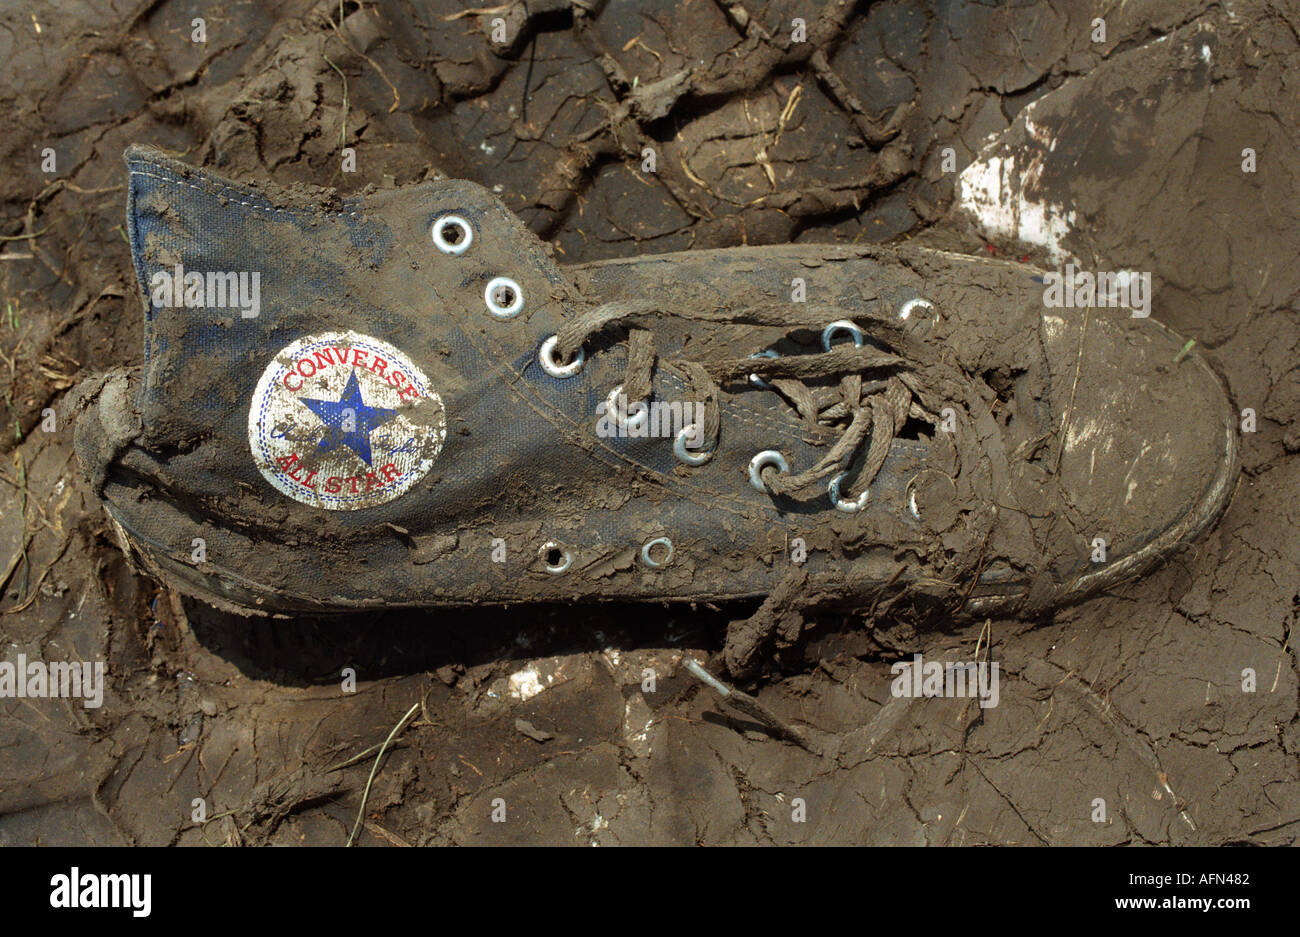 A muddy Chuck Taylor Converse lies abondoned in the mud after an outdoor  alternative music concert Stock Photo - Alamy